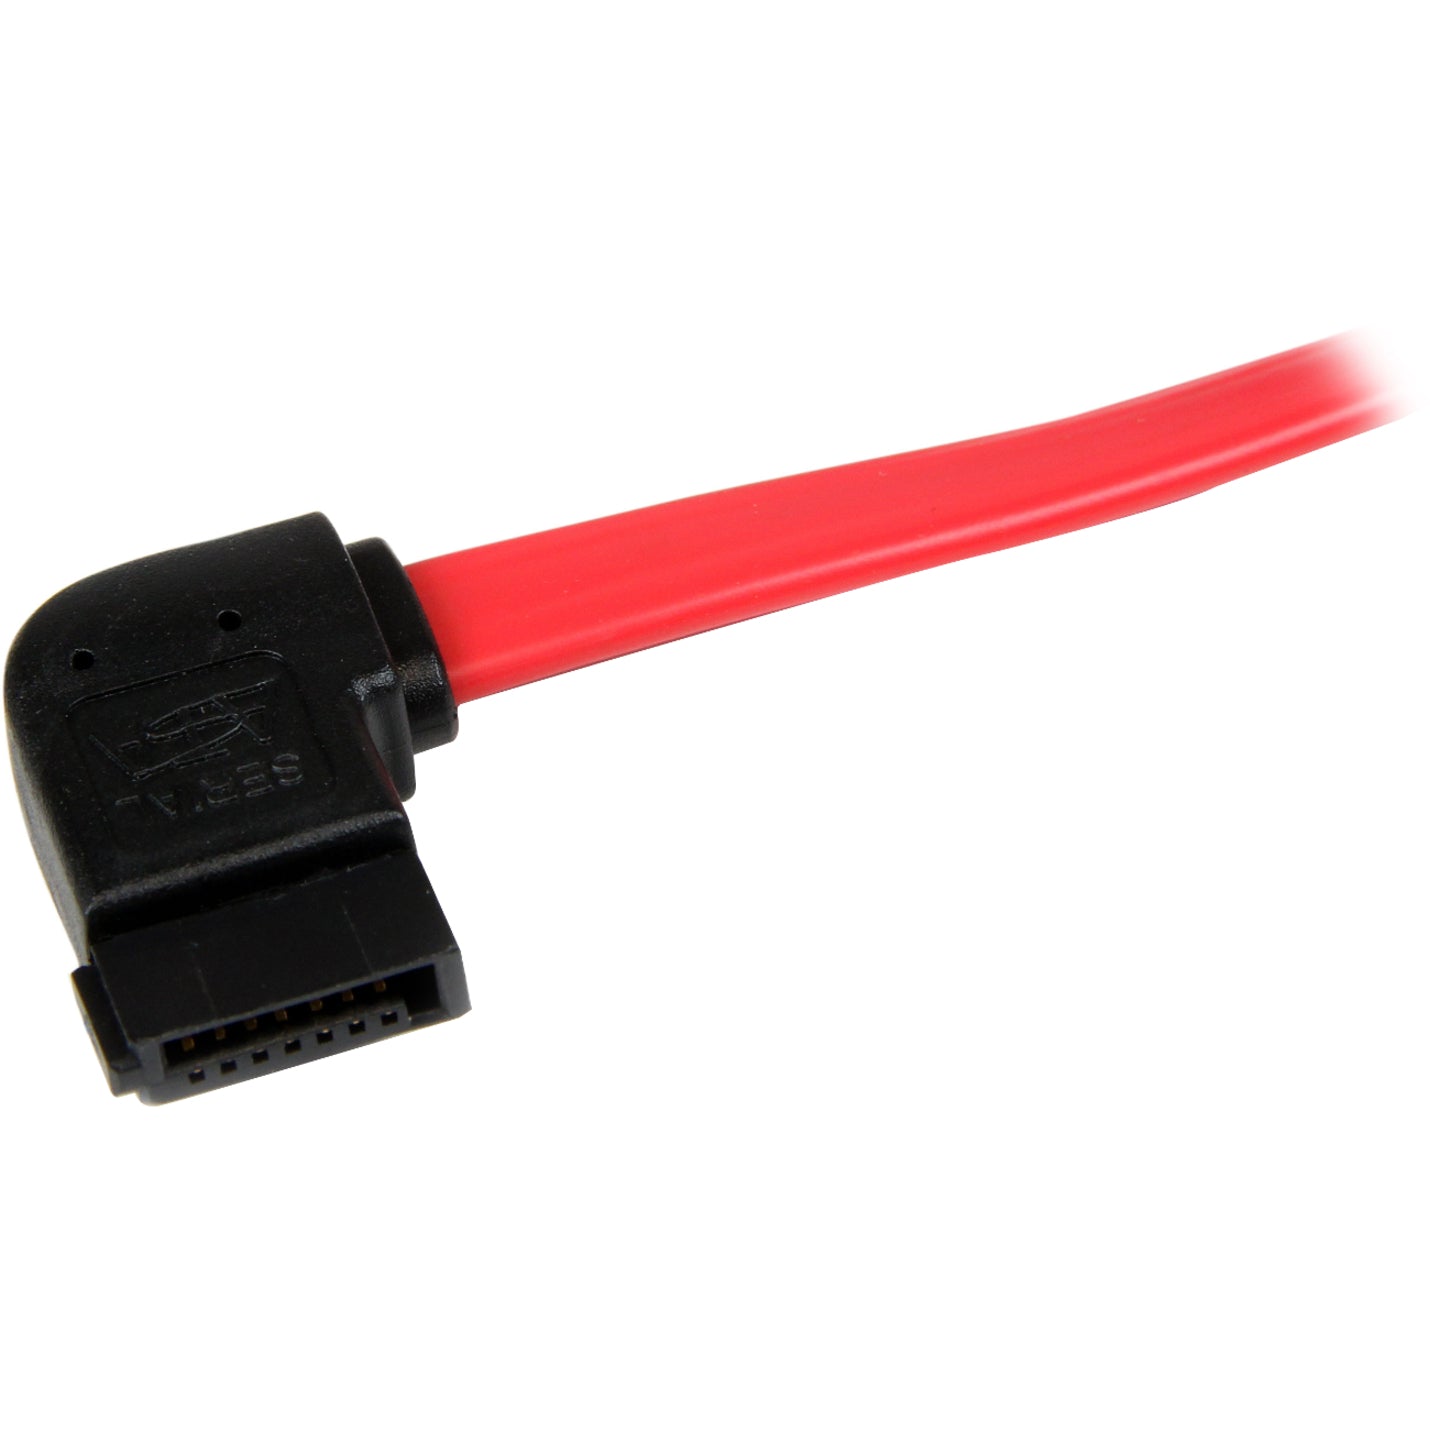 StarTech.com SATA18LSA1 18in SATA to Left Side Angle SATA Serial ATA Cable, Copper Conductor, 1.50 ft Length, Red